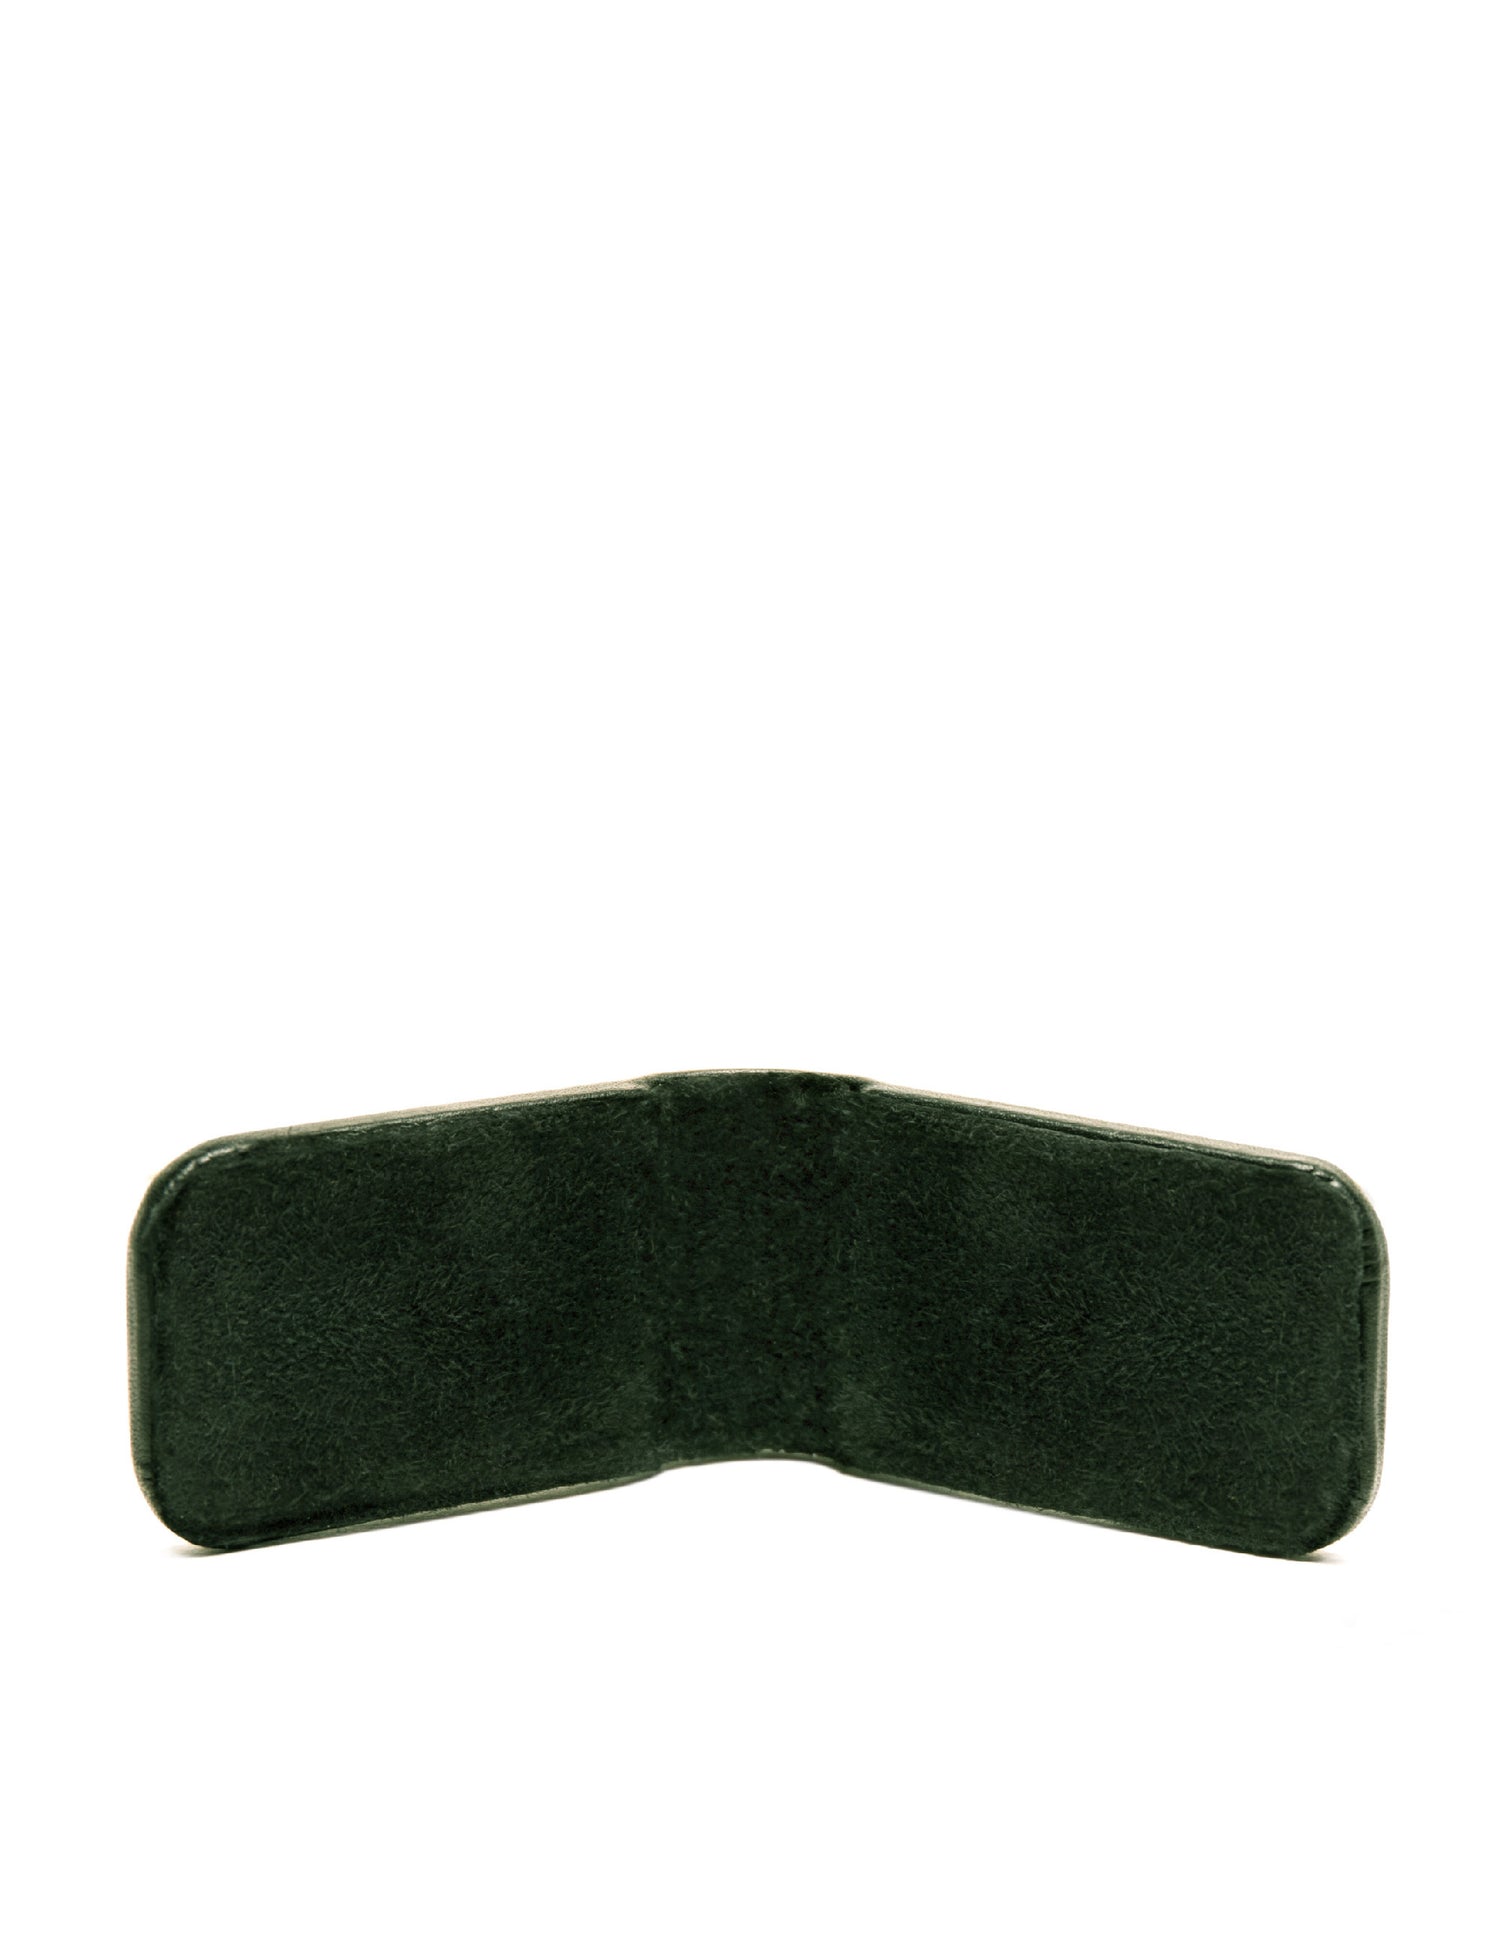 Opened photo of Magnetic Cash Clip in Green